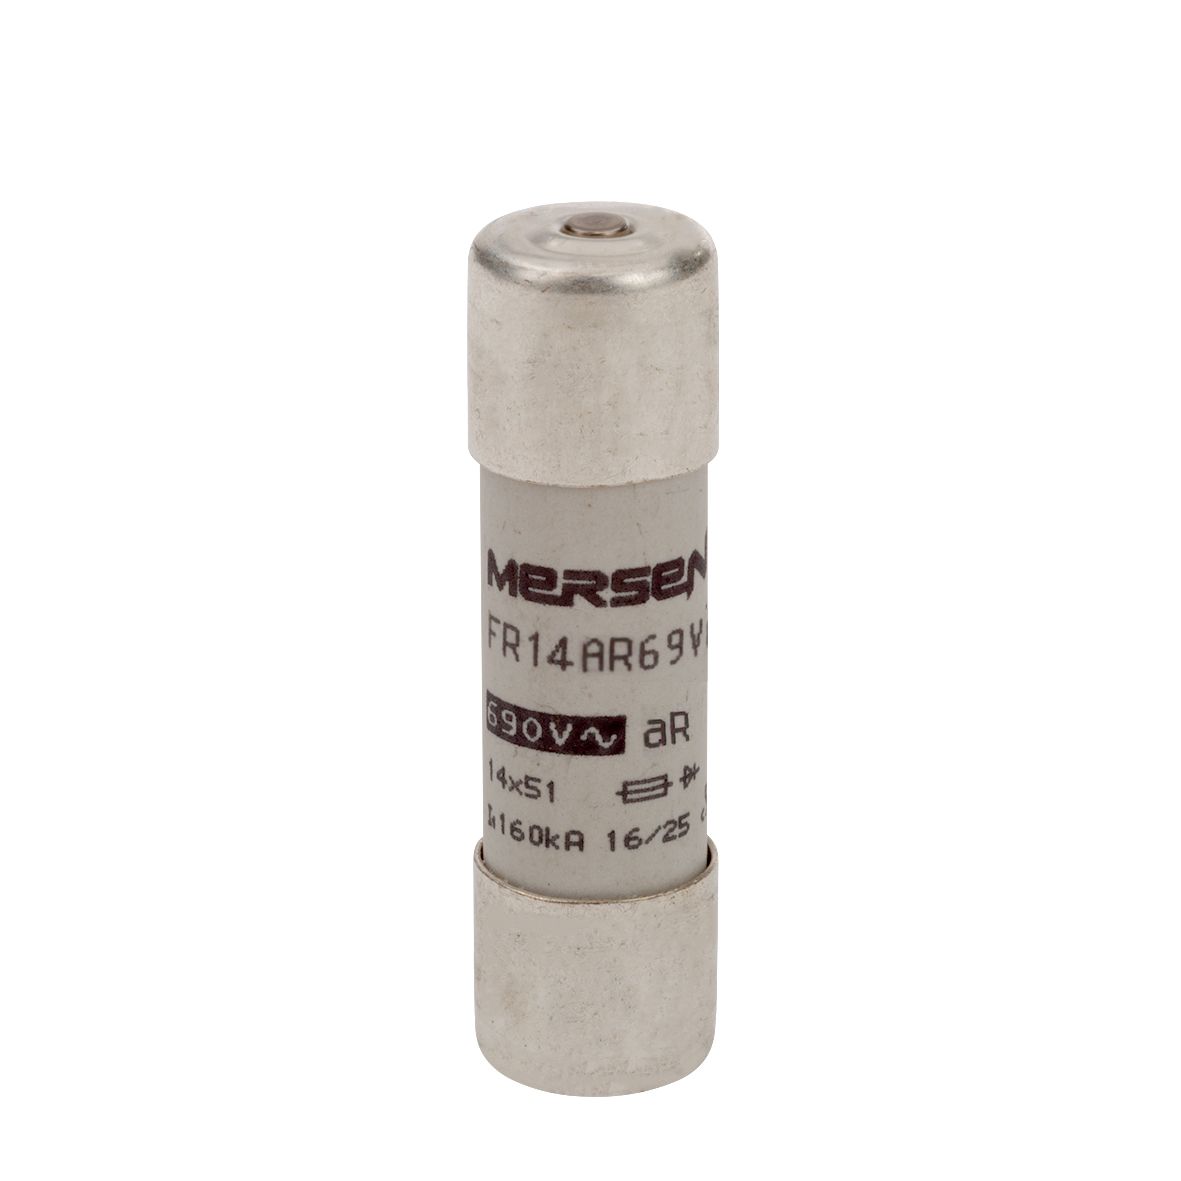 V1056661 - Cylindrical fuse-link aR 690VAC 14x51, 20A, with indicator